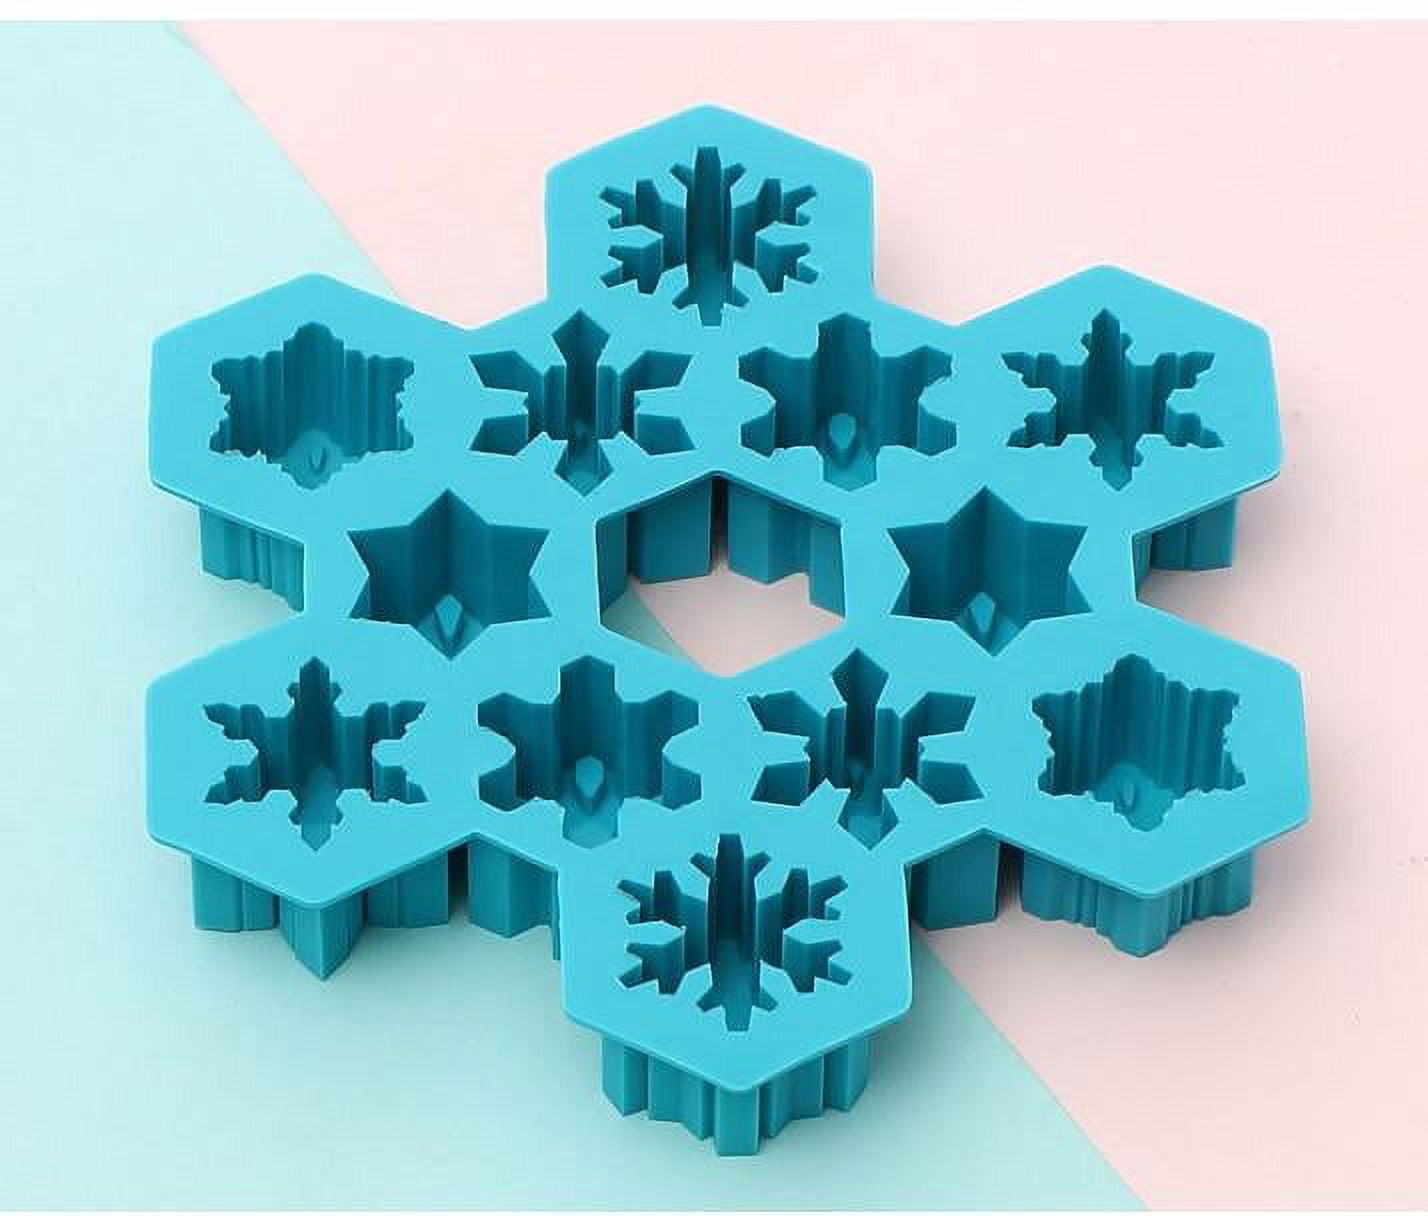 2 Pcs 12 Grids Silicone Ice Cube Trays Snowflake Shaped Chocolate DIY Mould Cupcake Dessert Baking Mold (Sky-blue), Size: 7.09 x 6.3 x 1.57